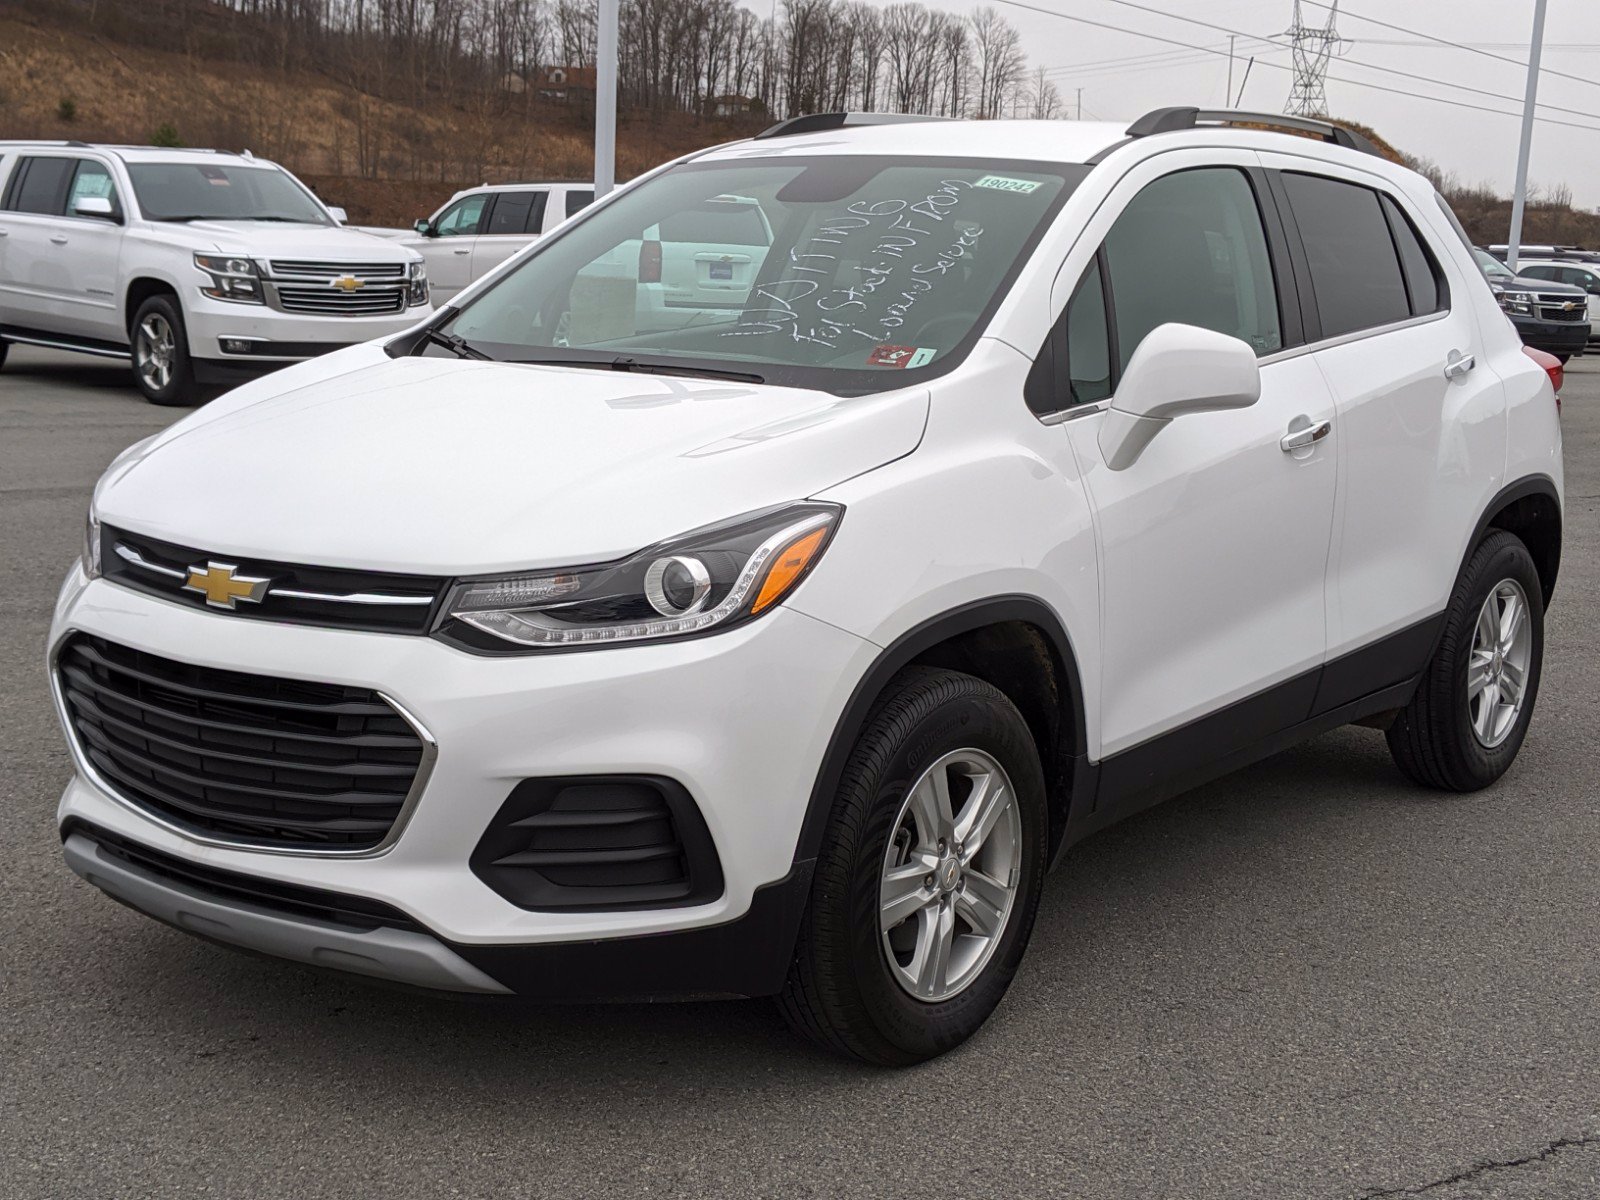 2019 chevy trax value